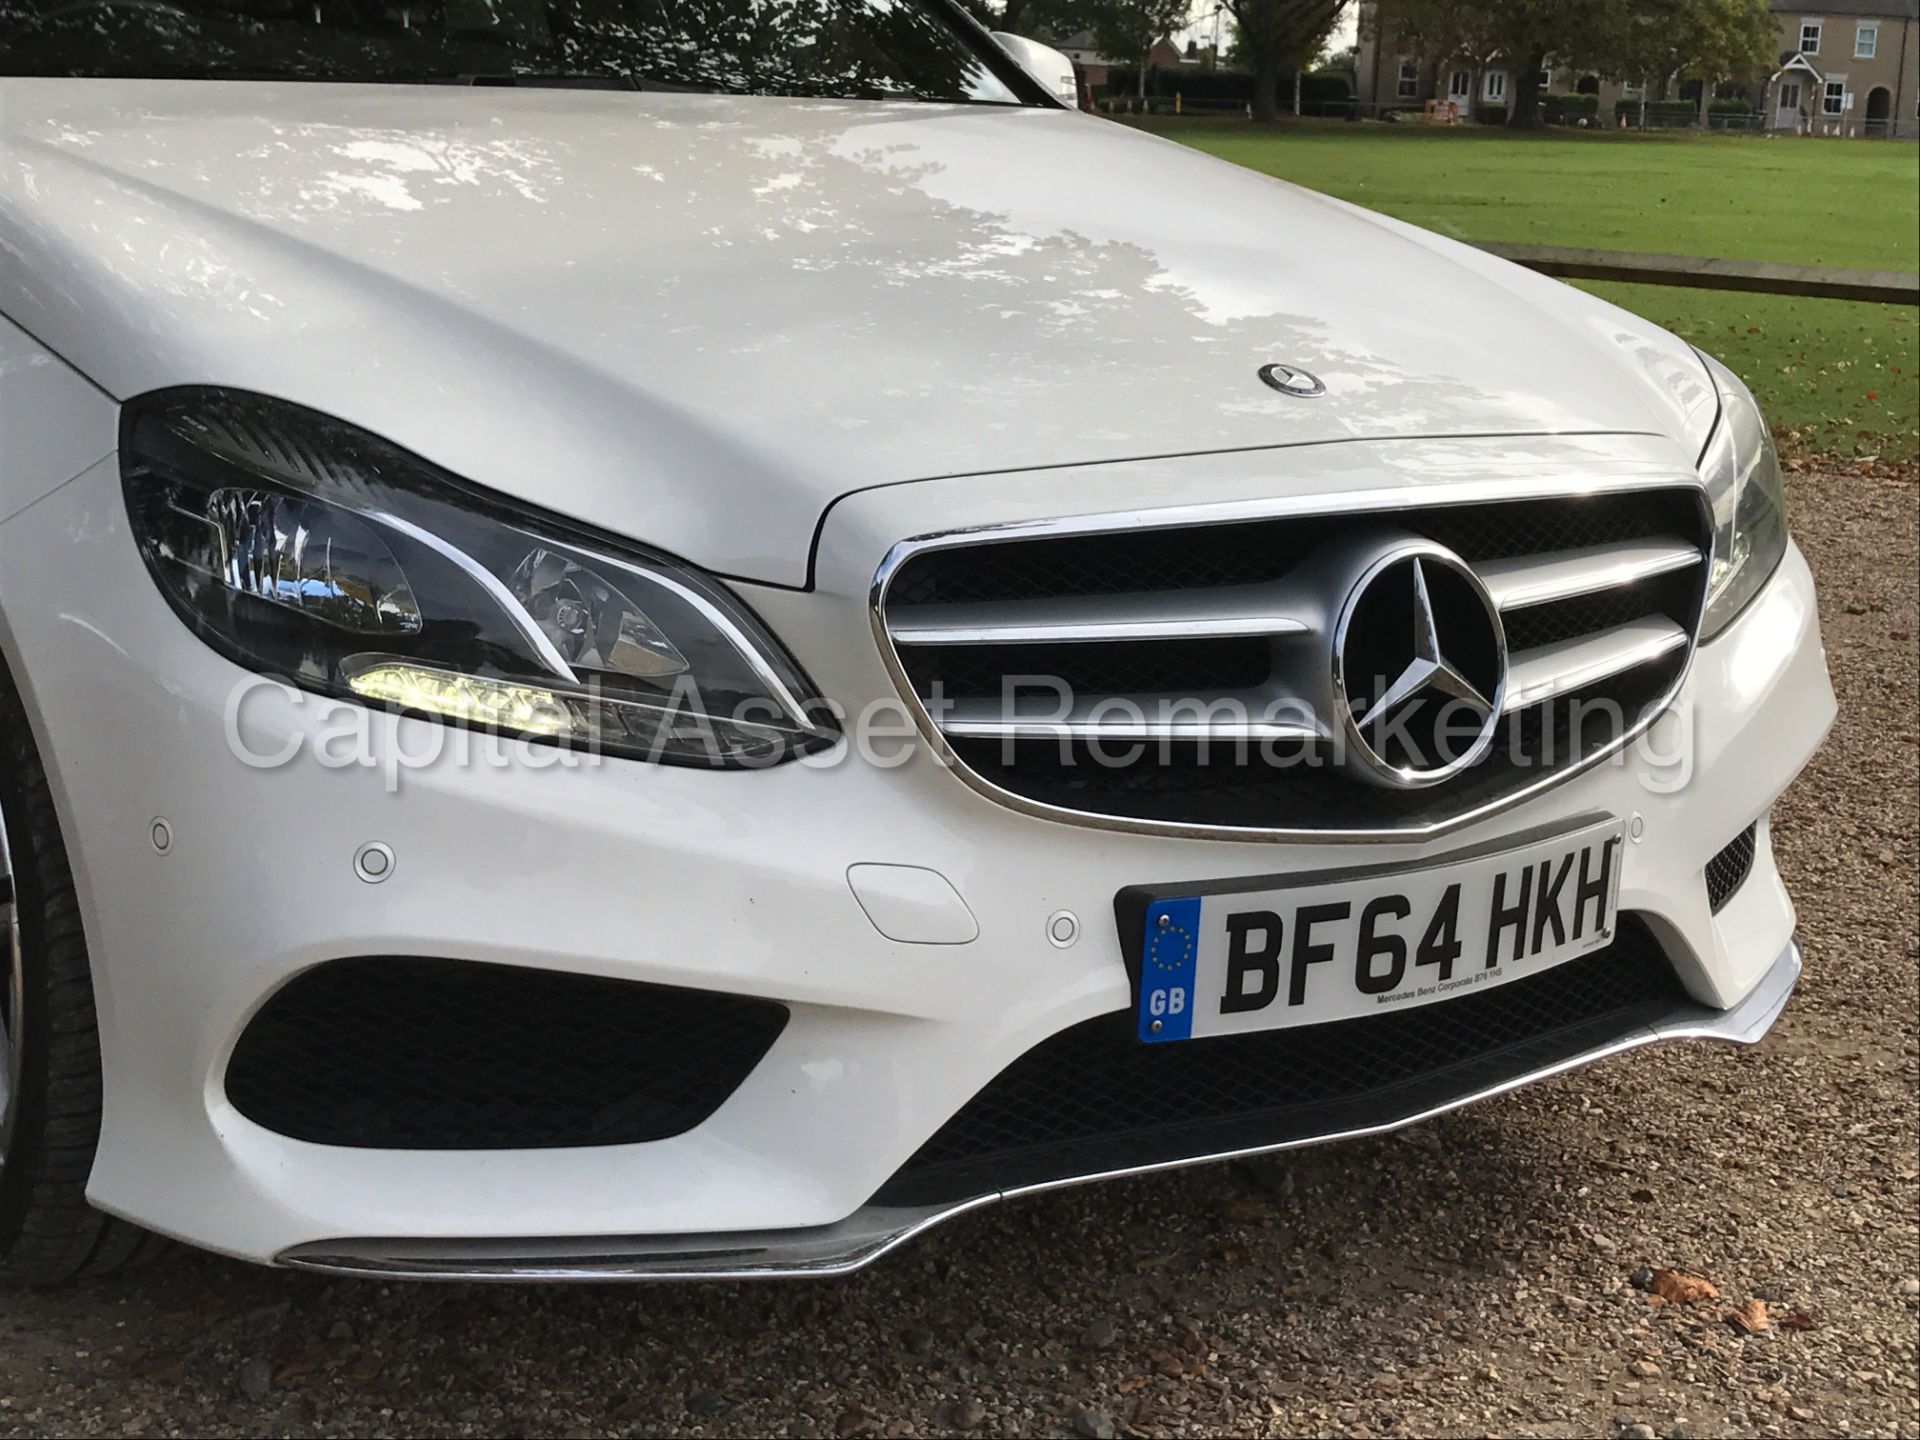 MERCEDES-BENZ E220 'AMG SPORT' (2015 MODEL) 'SALOON - AUTO - PAN ROOF - SAT NAV - LEATHER' *LOOK* - Image 13 of 33